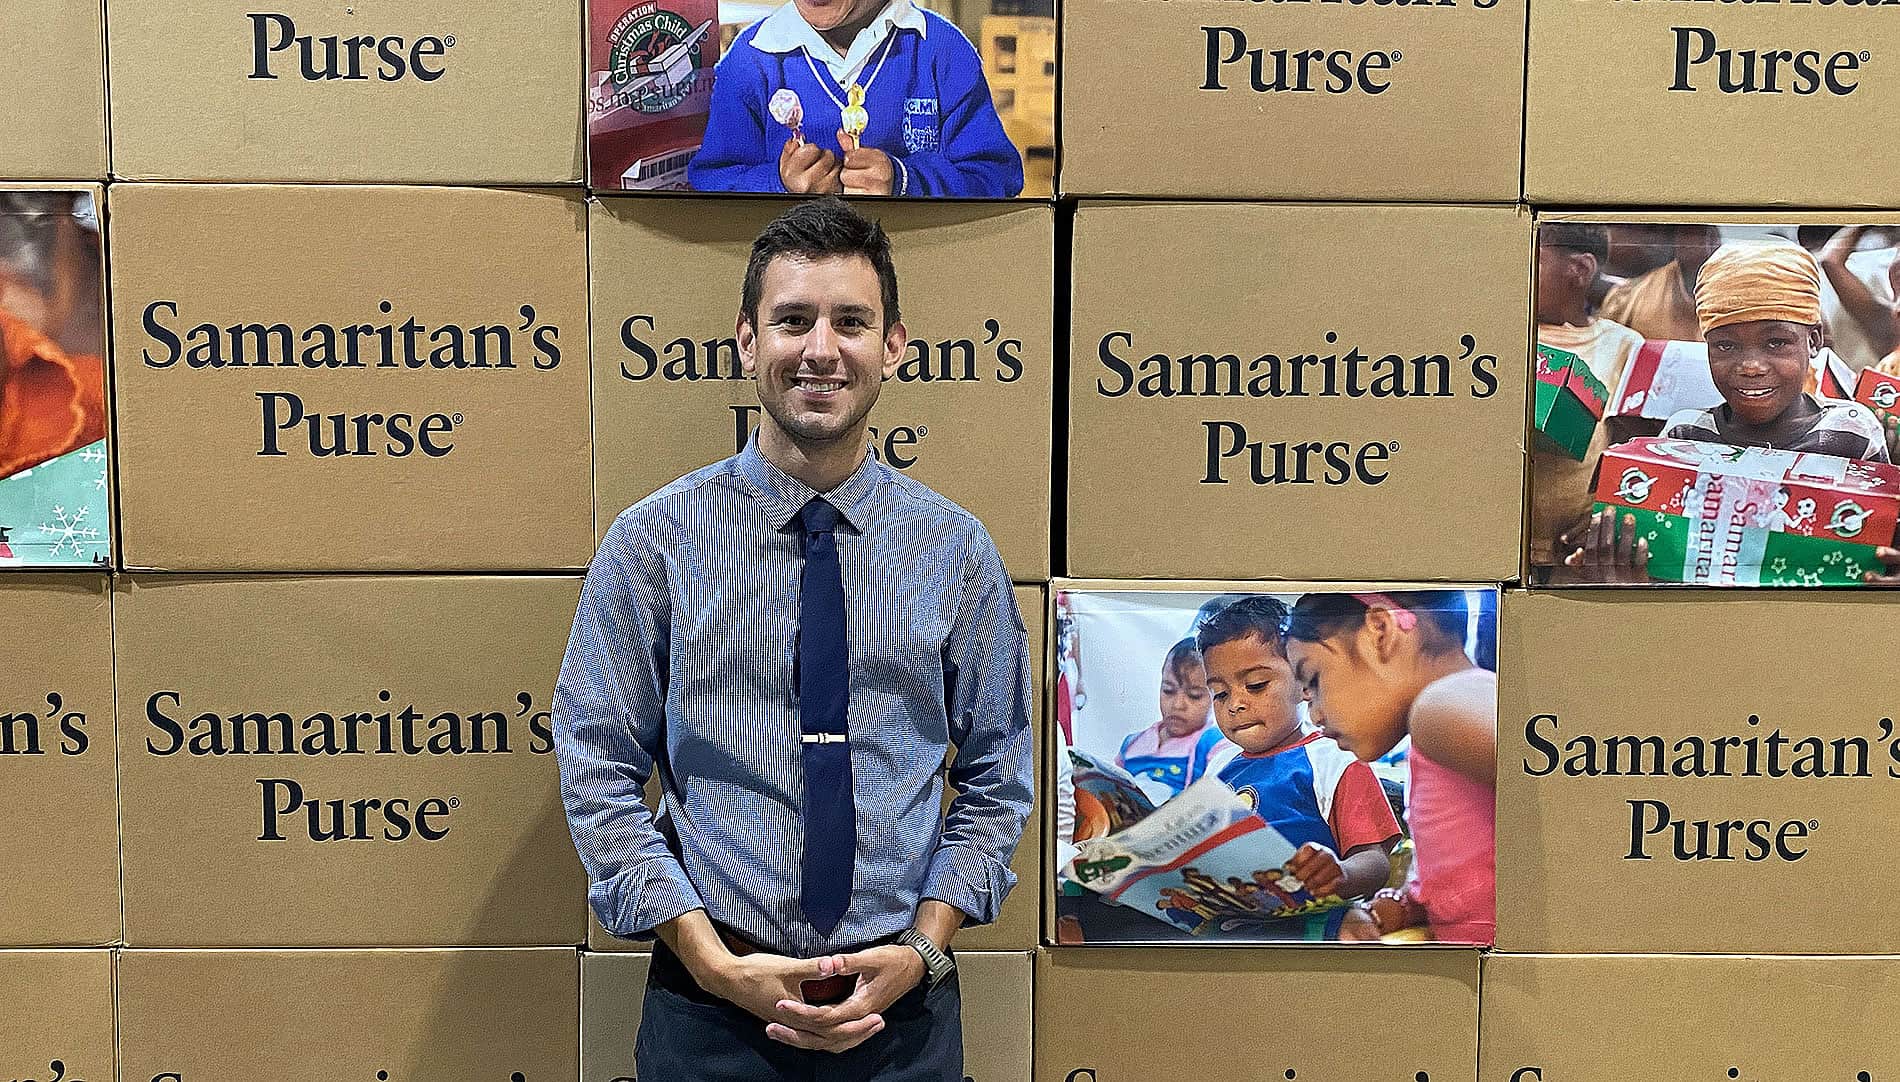             International studies prepared this logistician to deliver care — one shoebox at a time     